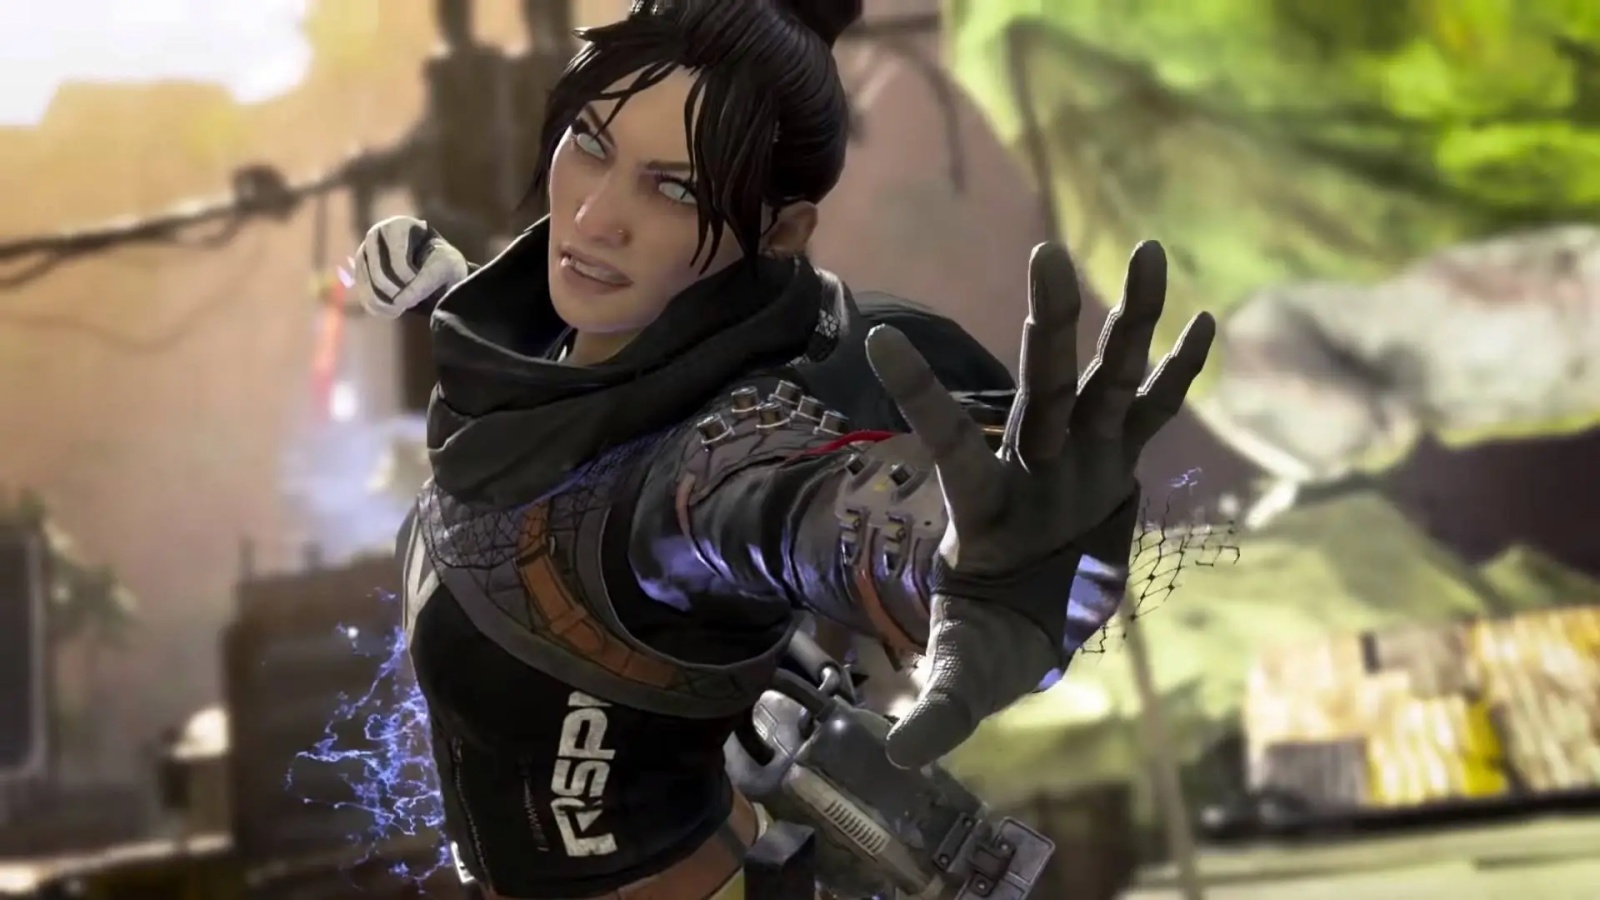 Apex Legends finisher glitch shows why Wraith is “completely bugged” – Dexerto